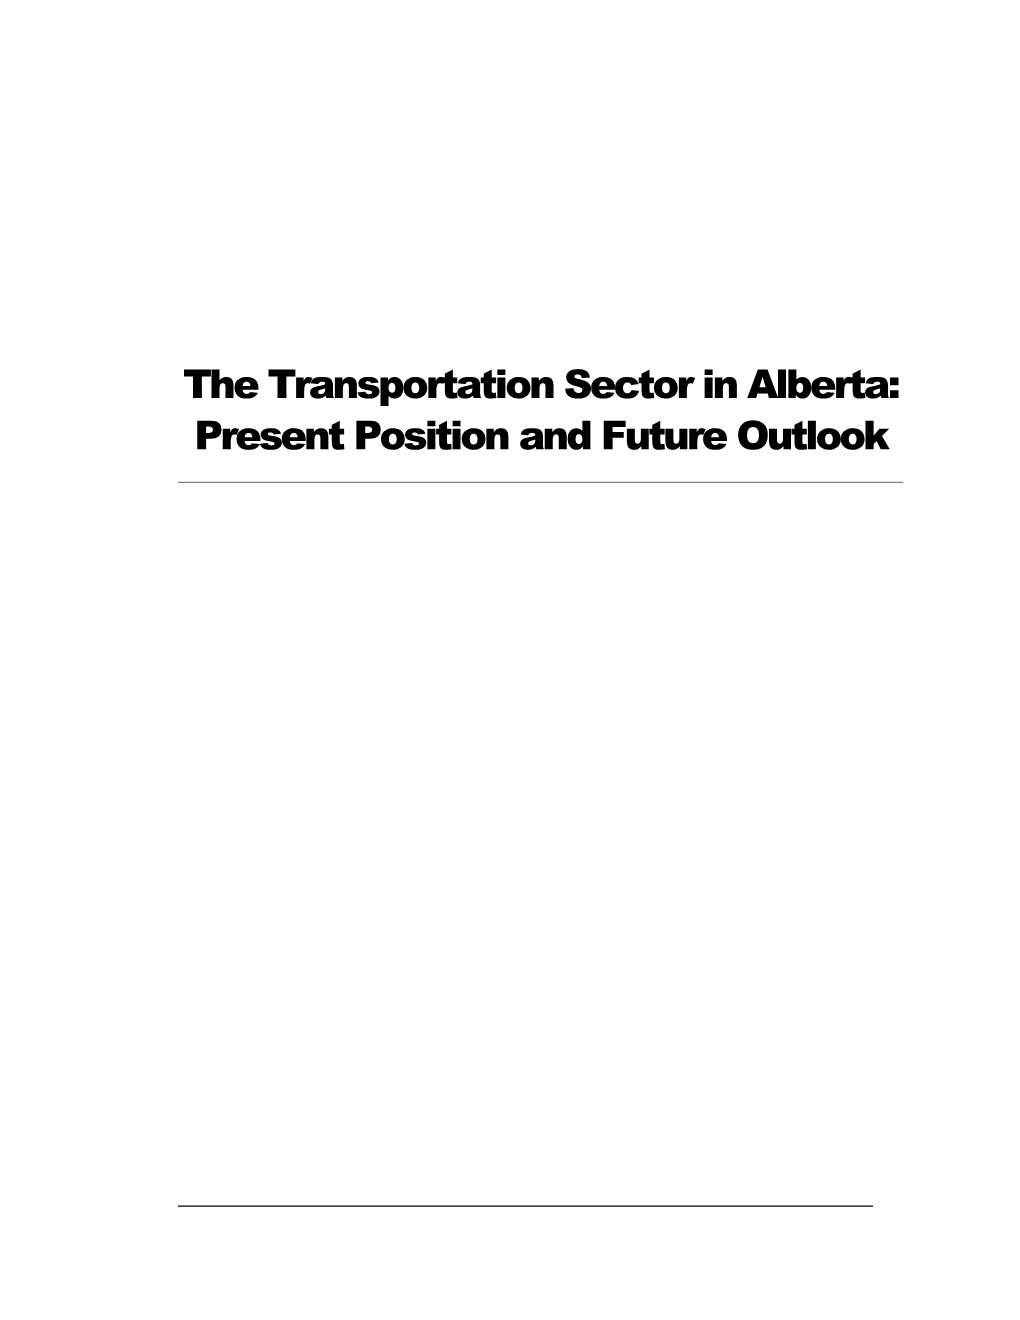 The Transportation Sector in Alberta: Present Position & Future Outlook